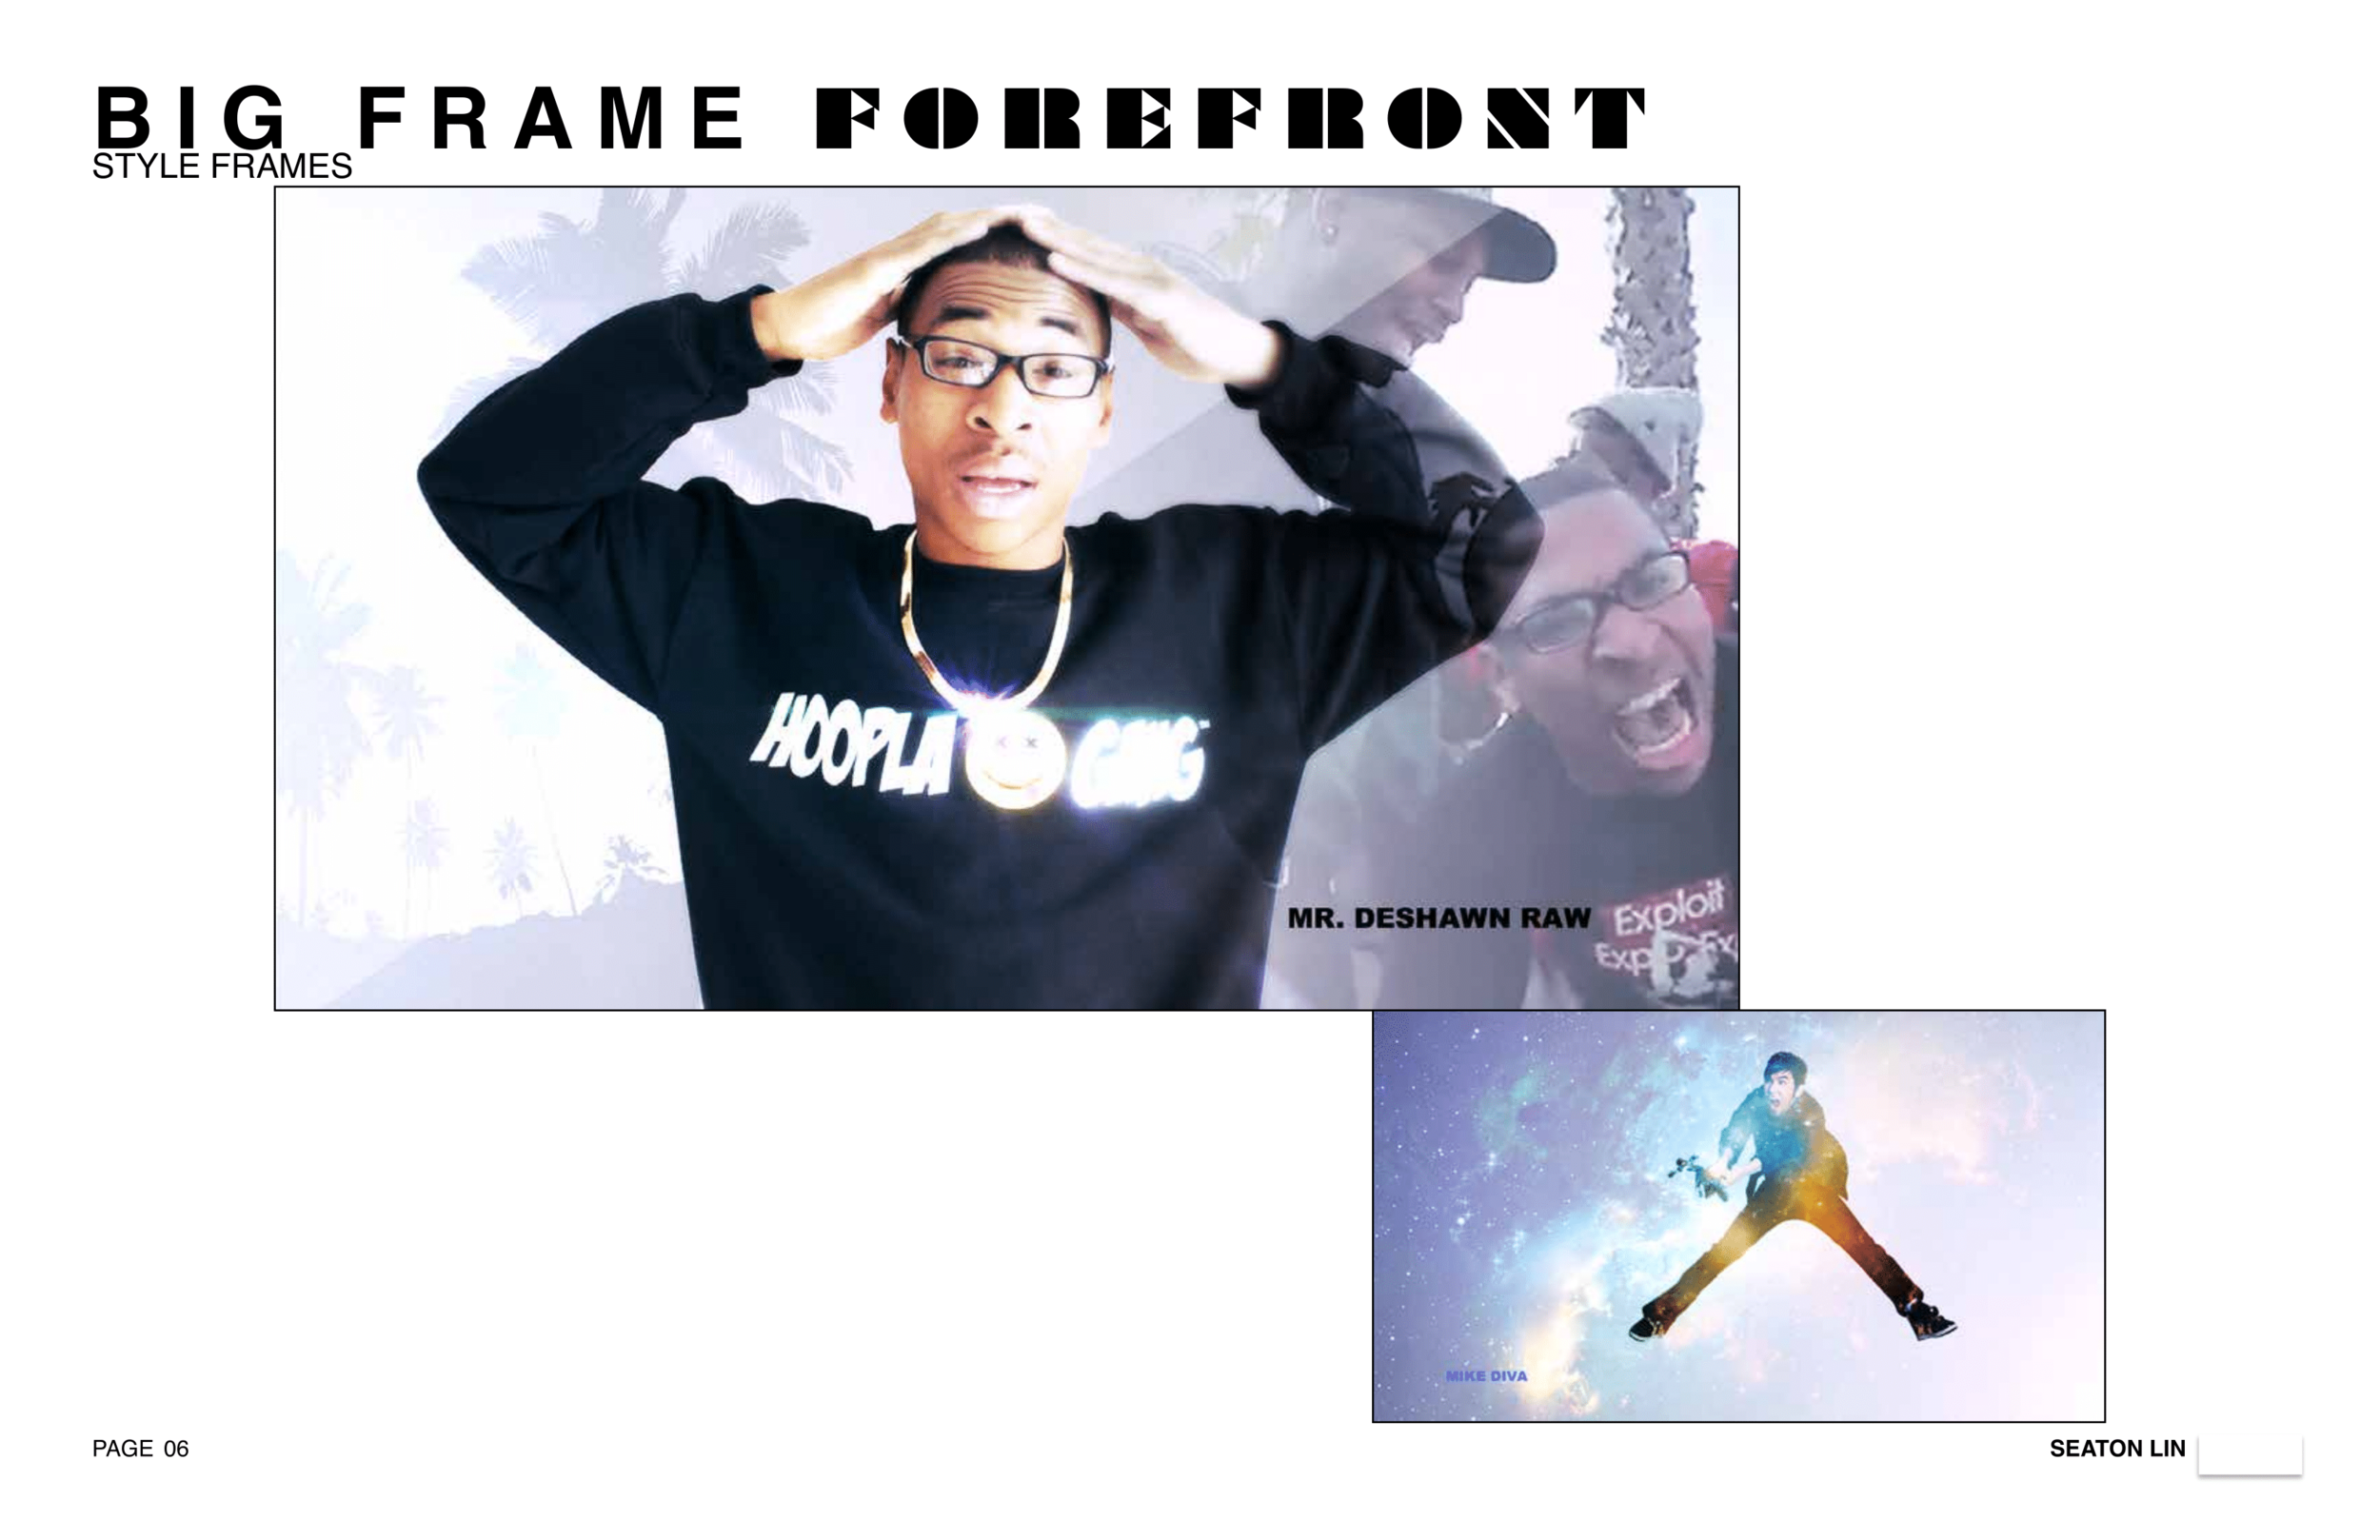 BigFrame_ForeFront_Treatment_SeatonLin-06.png